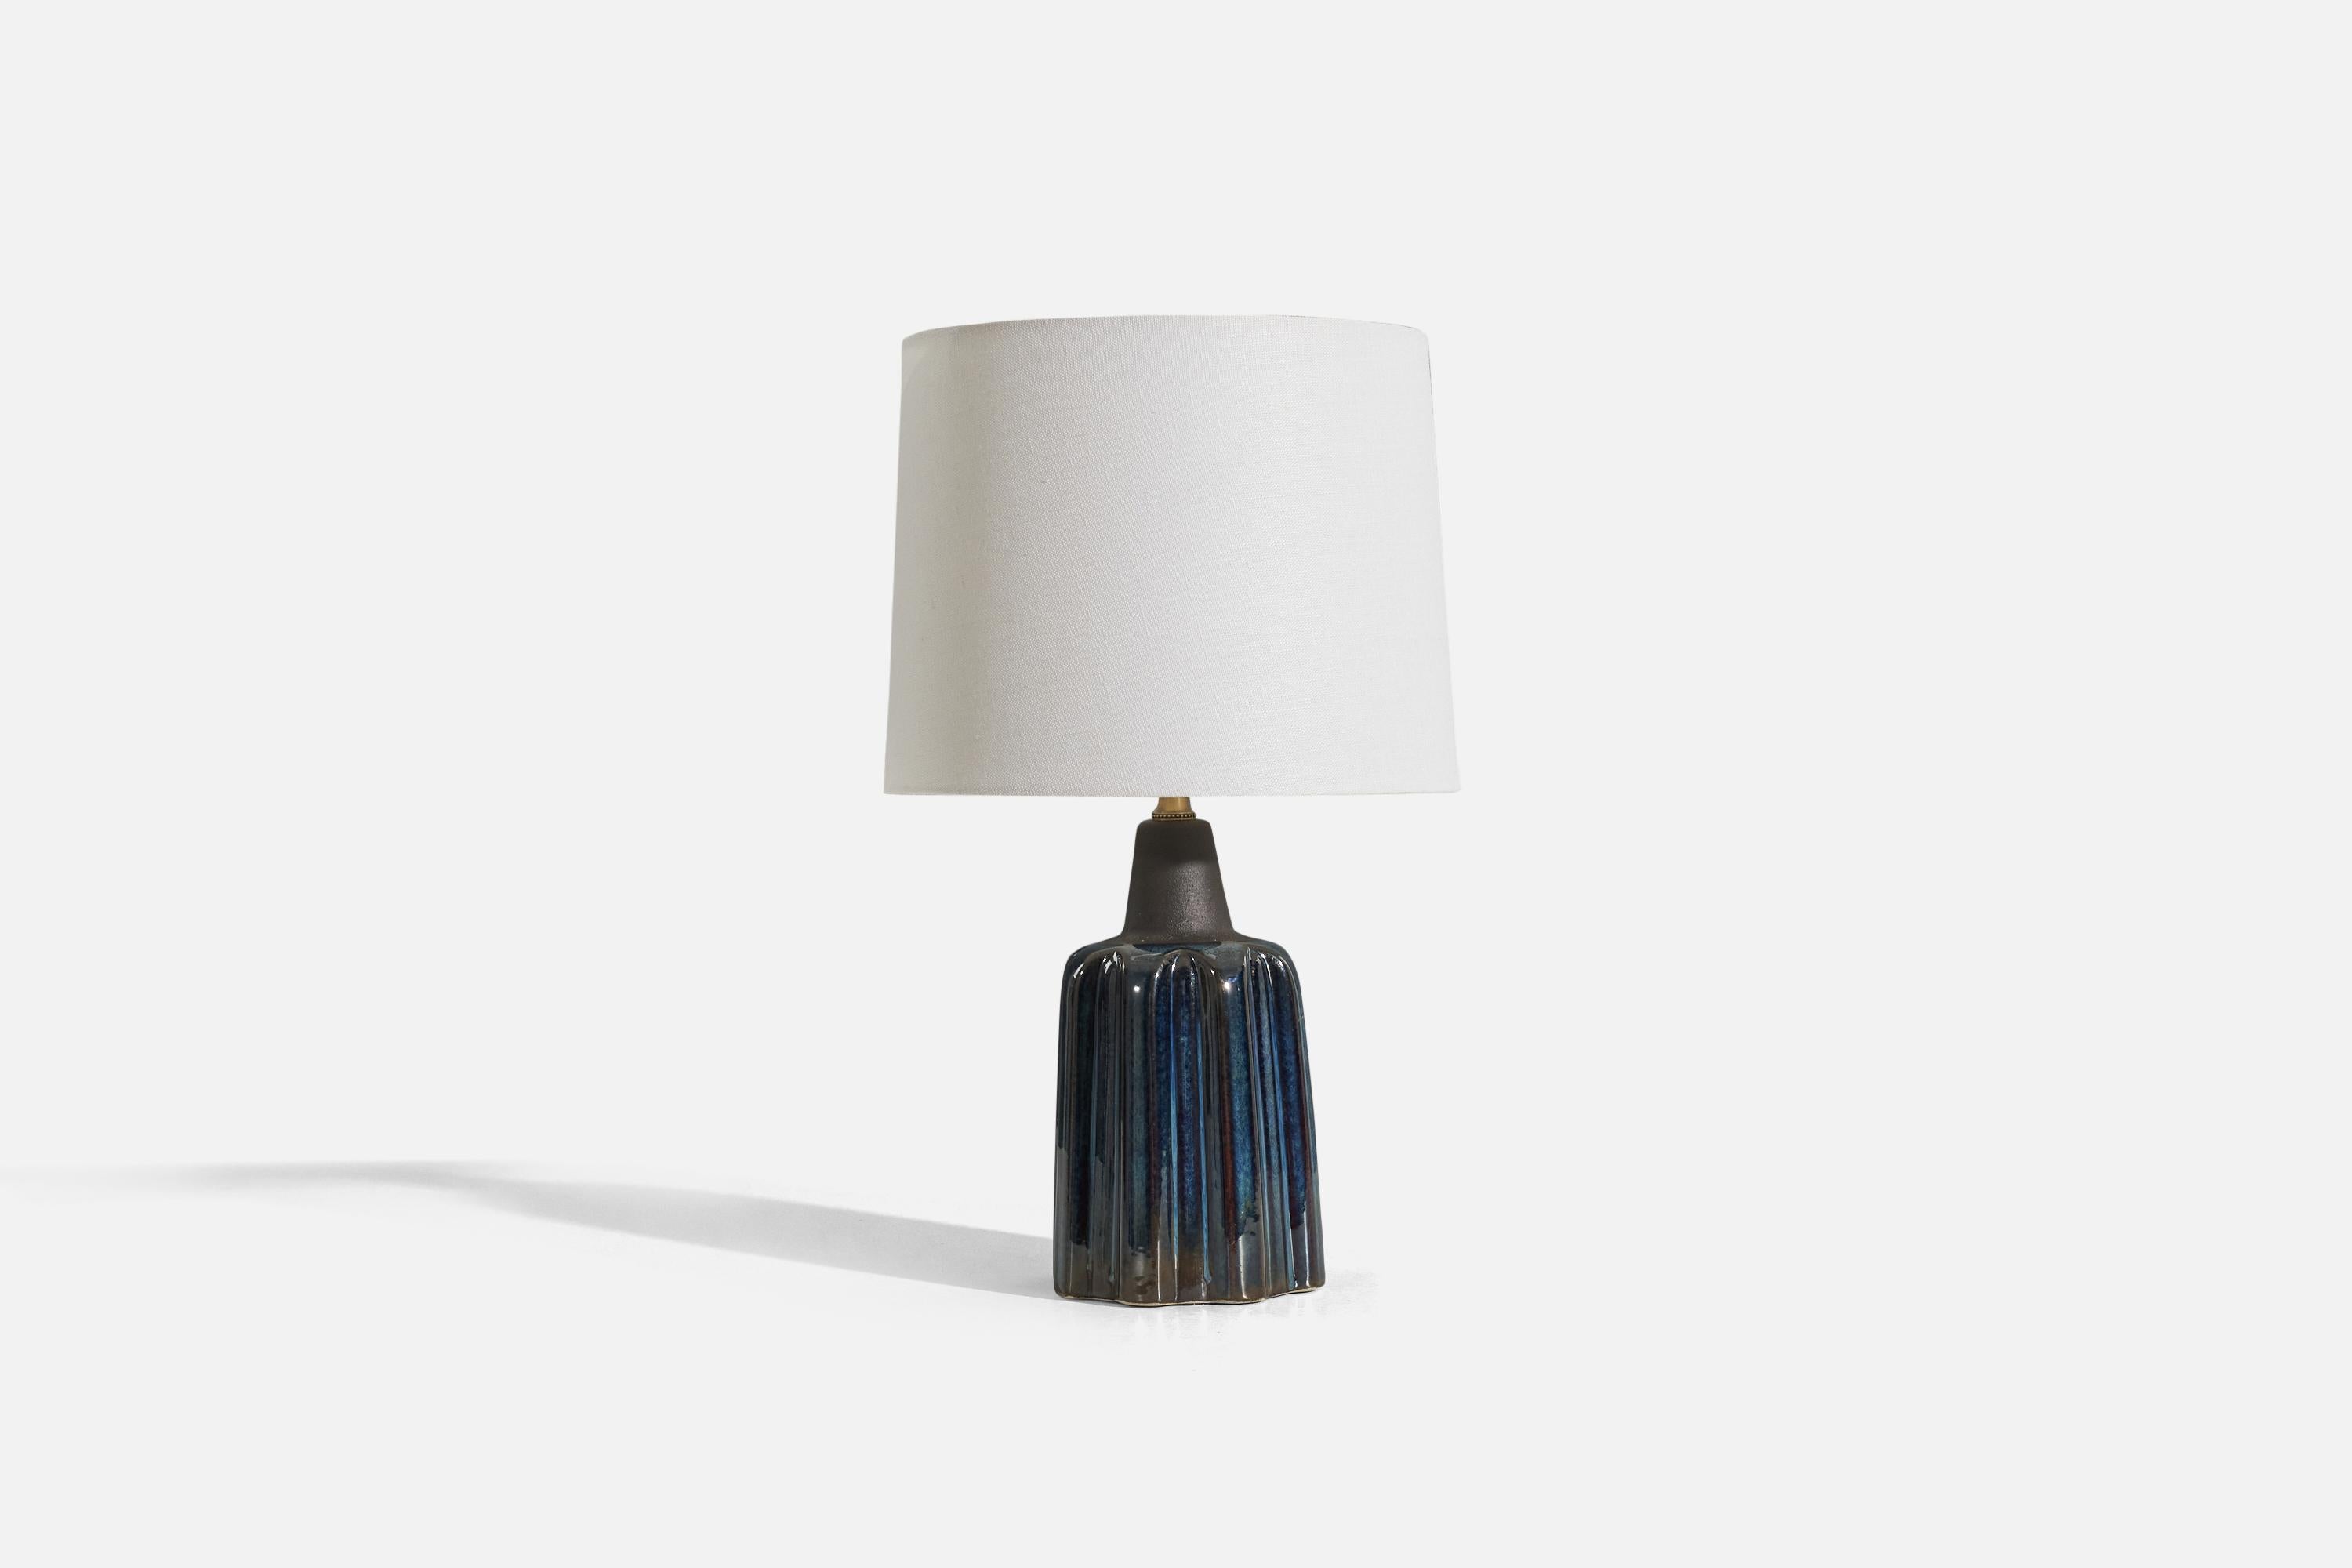 A blue, glazed stoneware table lamp designed and produced by Søholm Stentøj, Denmark, c. 1960s.

Sold without lampshade. 
Dimensions of Lamp (inches) : 12.25 x 5 x 5 (H x W x D)
Dimensions of Shade (inches) : 9.125 x 10 x 7.875 (T x B x S)
Dimension